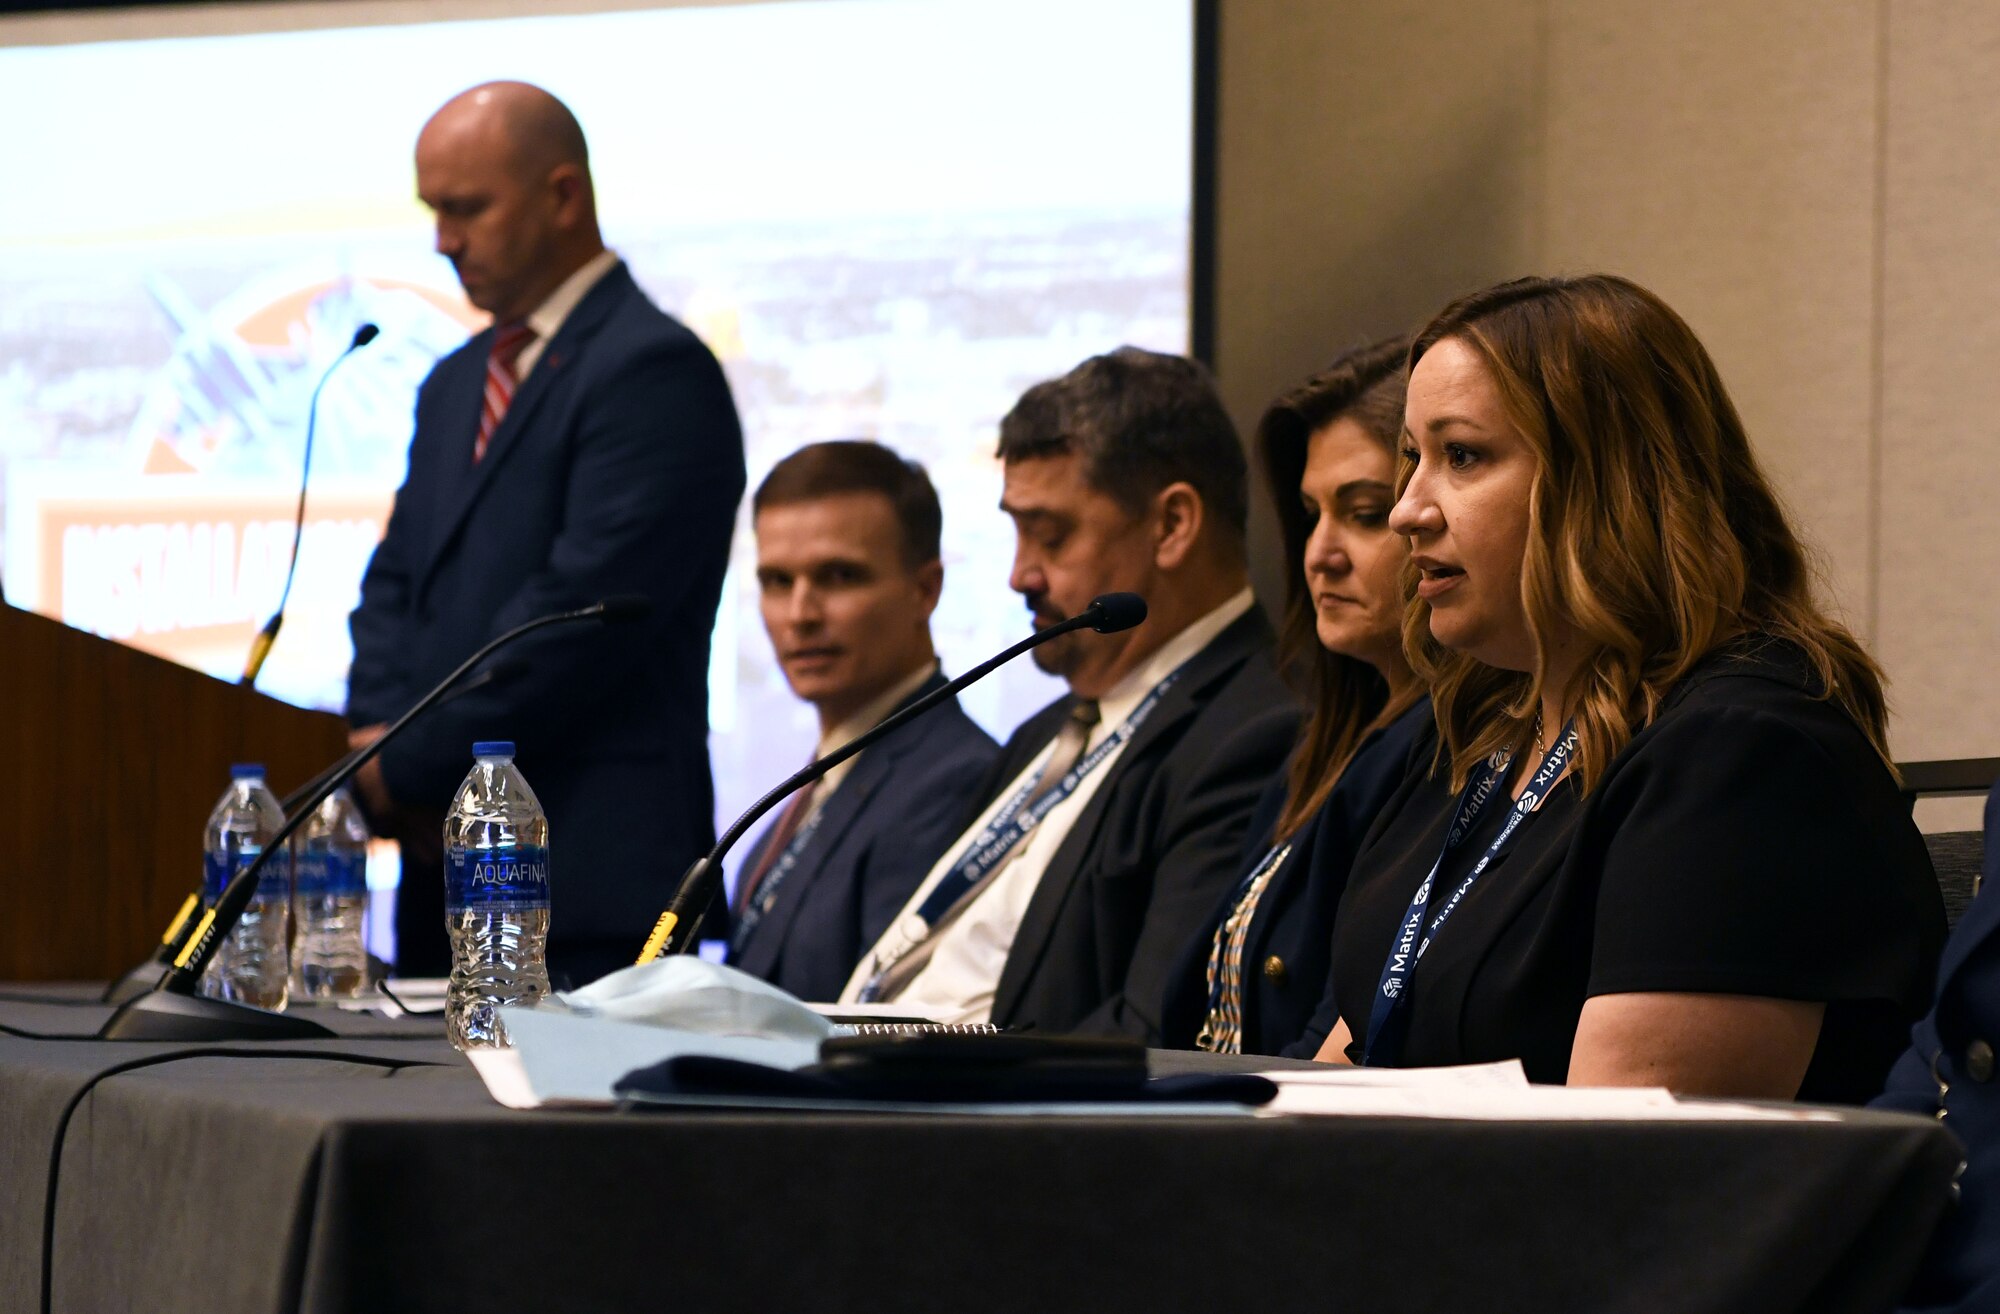 Representatives from Holloman Air Force Base and Goodfellow AFB, Texas, speak at the Association of Defense Communities Installation Innovation Forum 2021, Nov. 2, 2021.